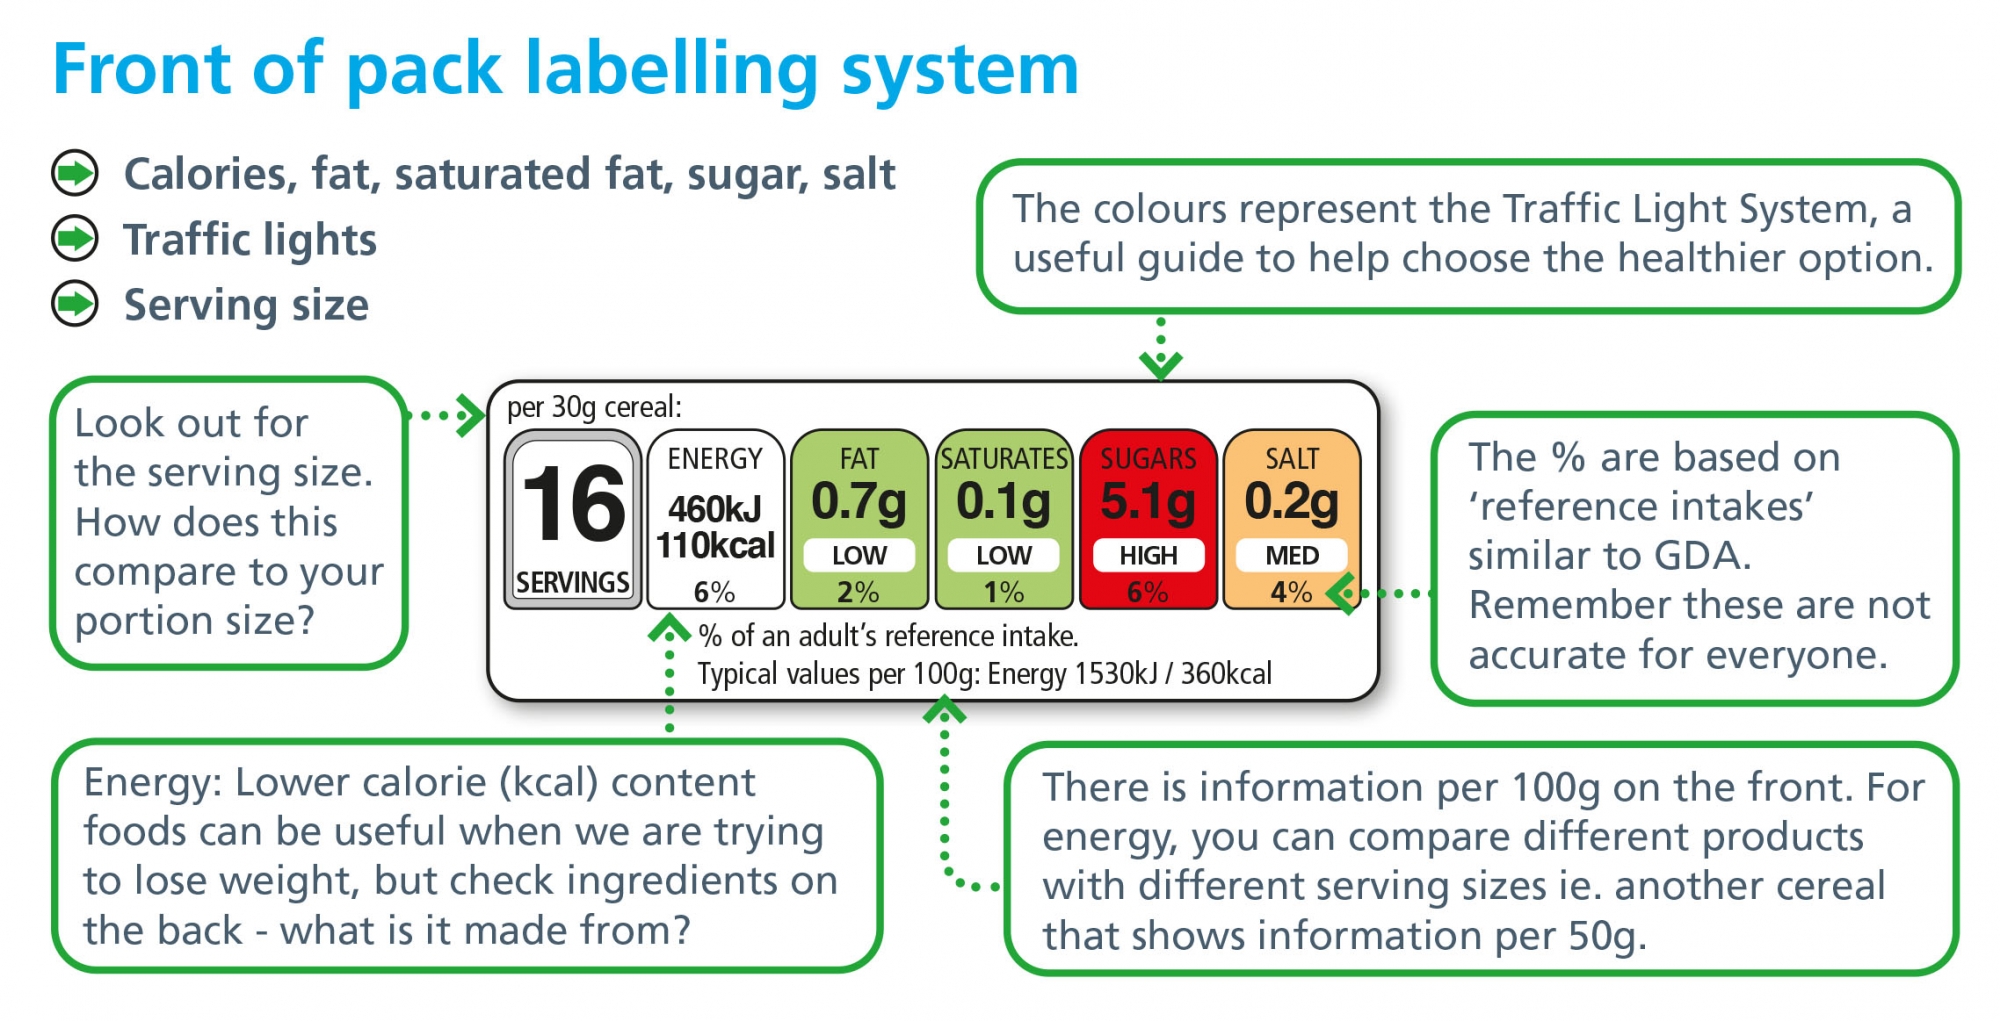 Front of pack labelling system with an image of a food label and five textboxes linking to it: Look out for the serving size. How does this compare to your portion size? The colours represent the Traffic Light System, a useful guide to help choose the hea